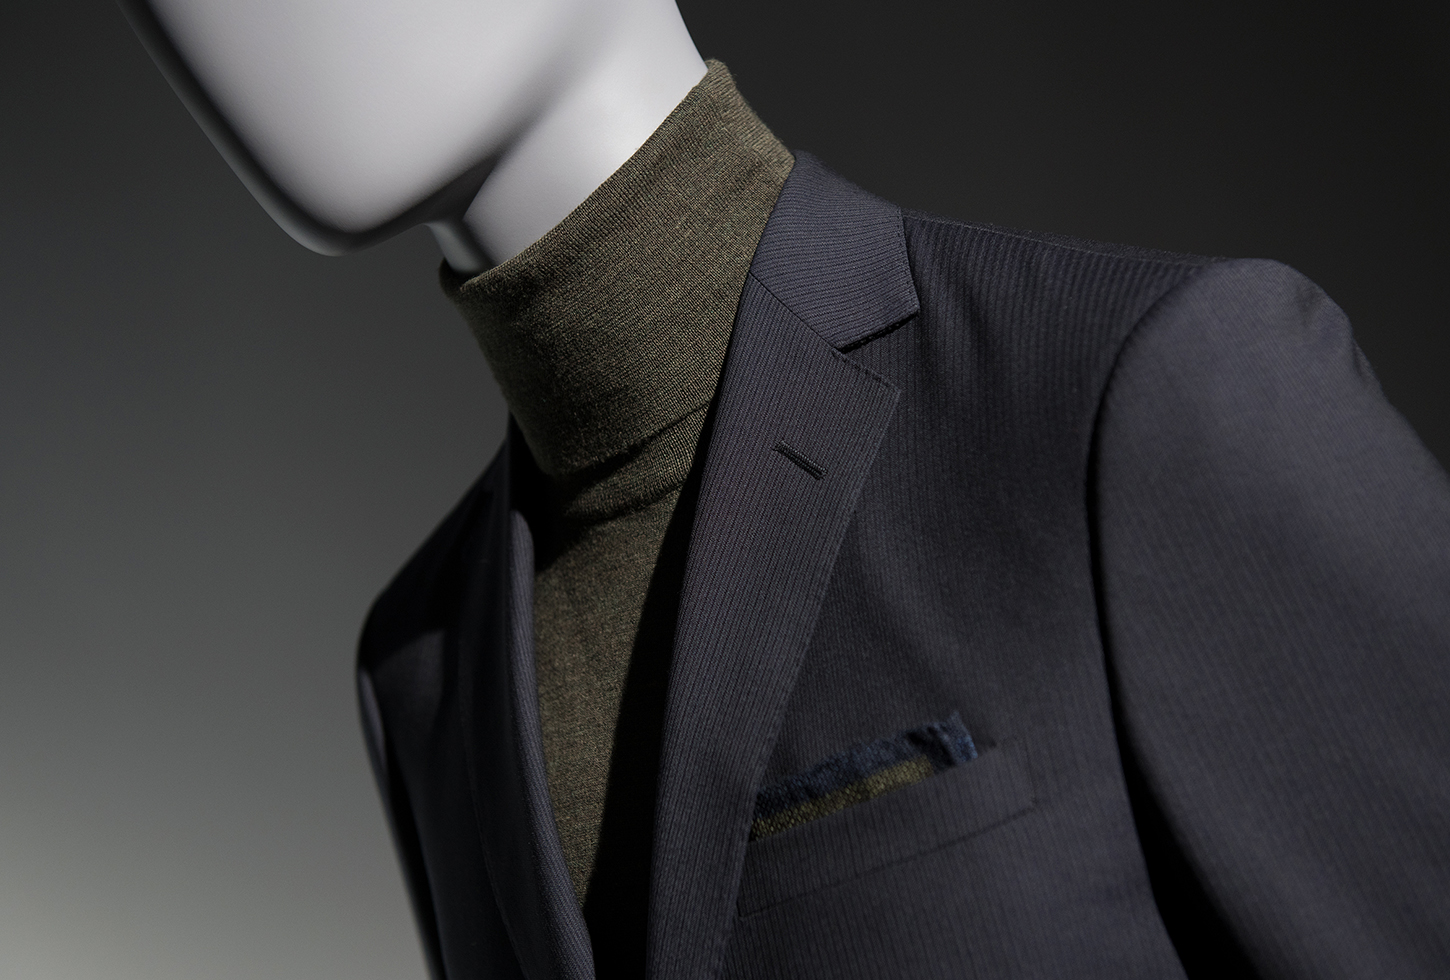 Male mannequins for tailors – Tailored collection Hans Boodt Mannequins